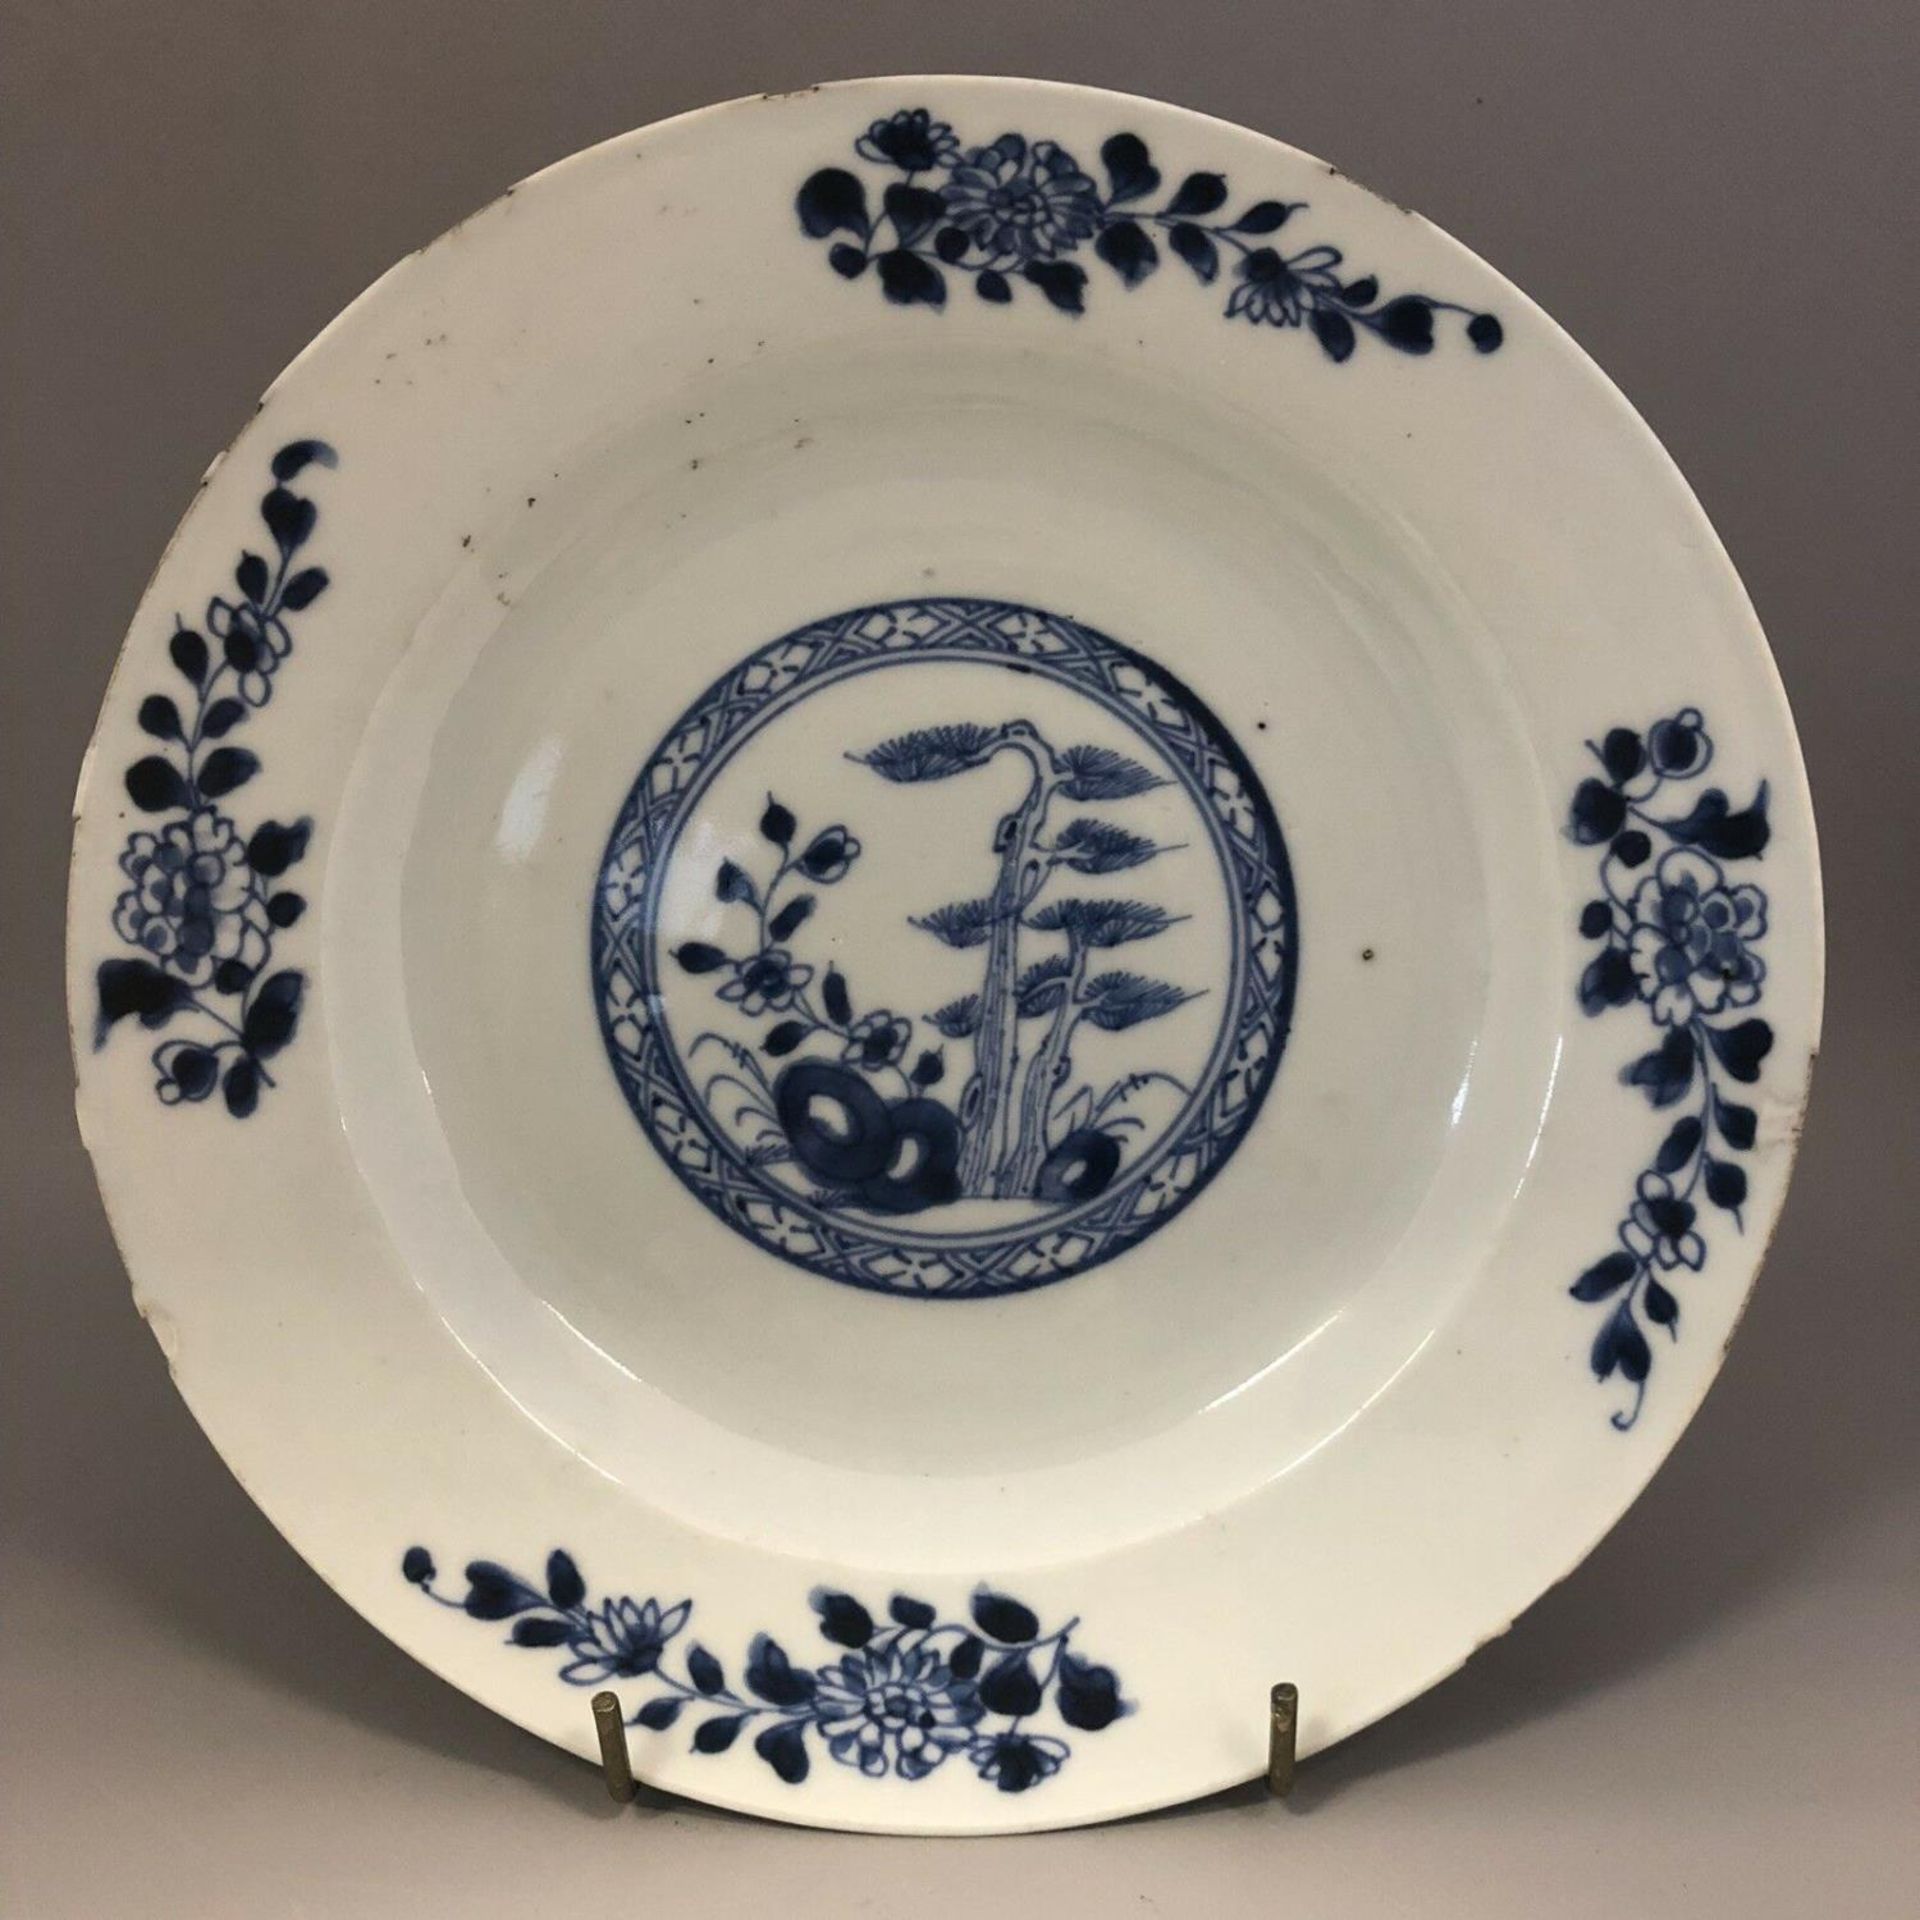 An 18th century Chinese blue and white plate with pine and flowers. No makers mark